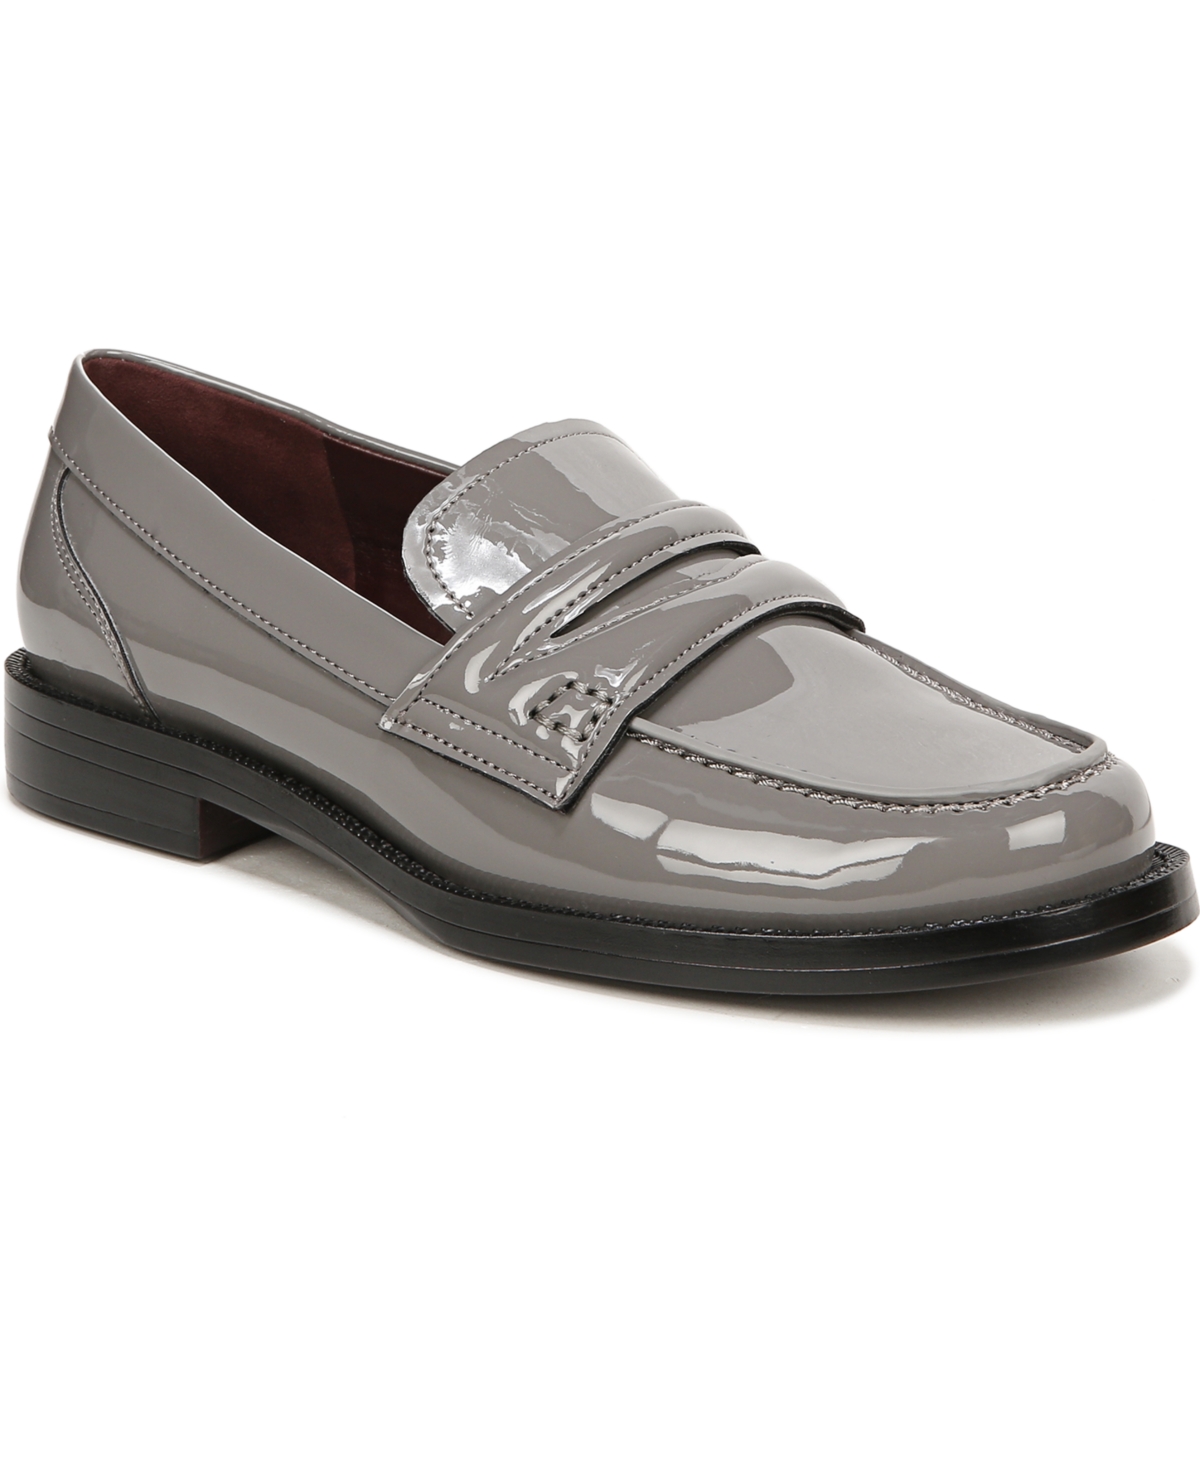 Lillian Round Toe Loafers - Slate Grey Faux Patent